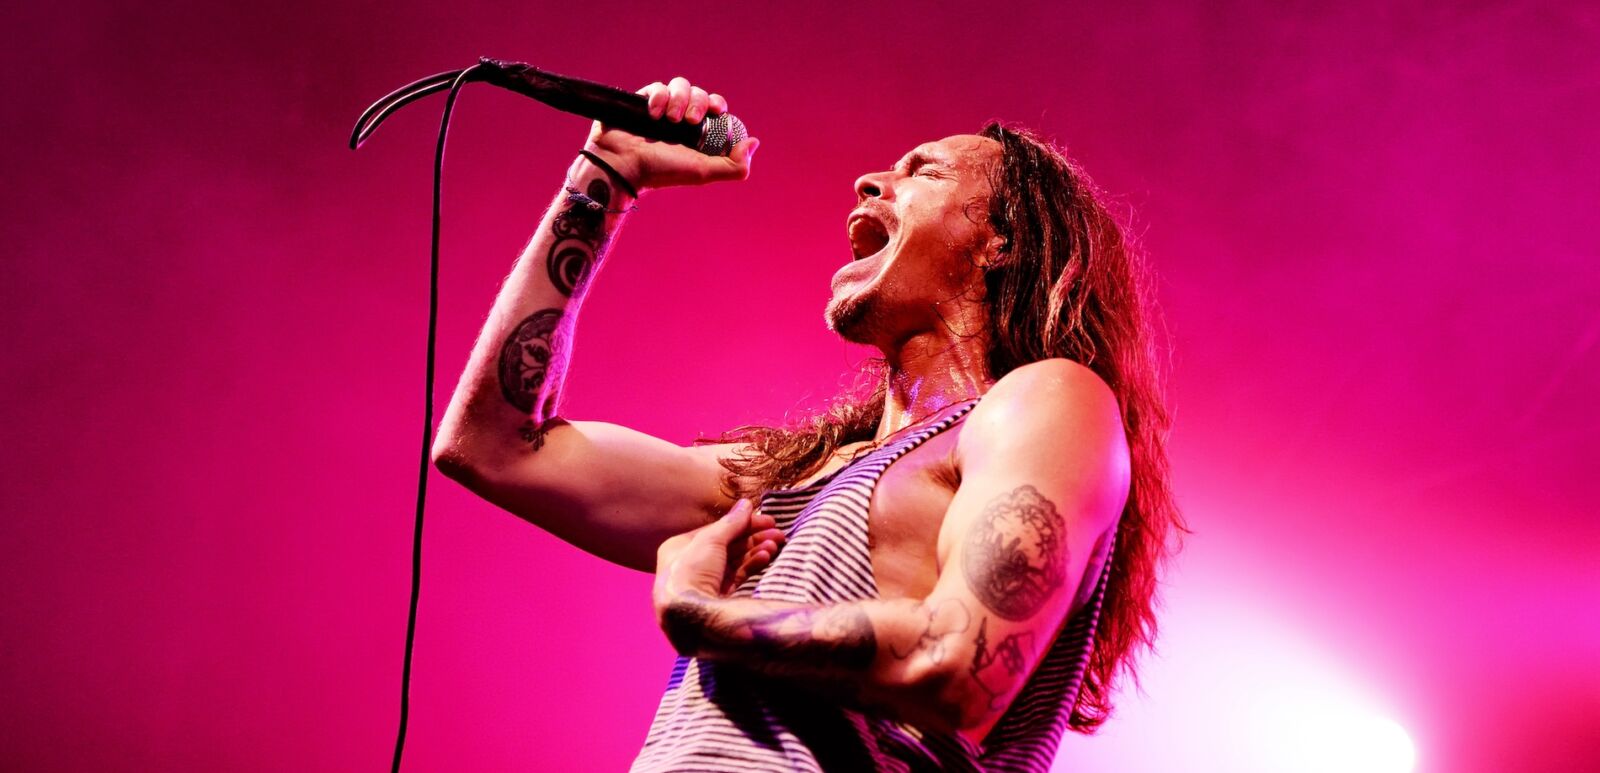 Incubus (heavy metal rock band) perform in concert at Razzmatazz stage on August 26, 2018 in Barcelona, Spain.